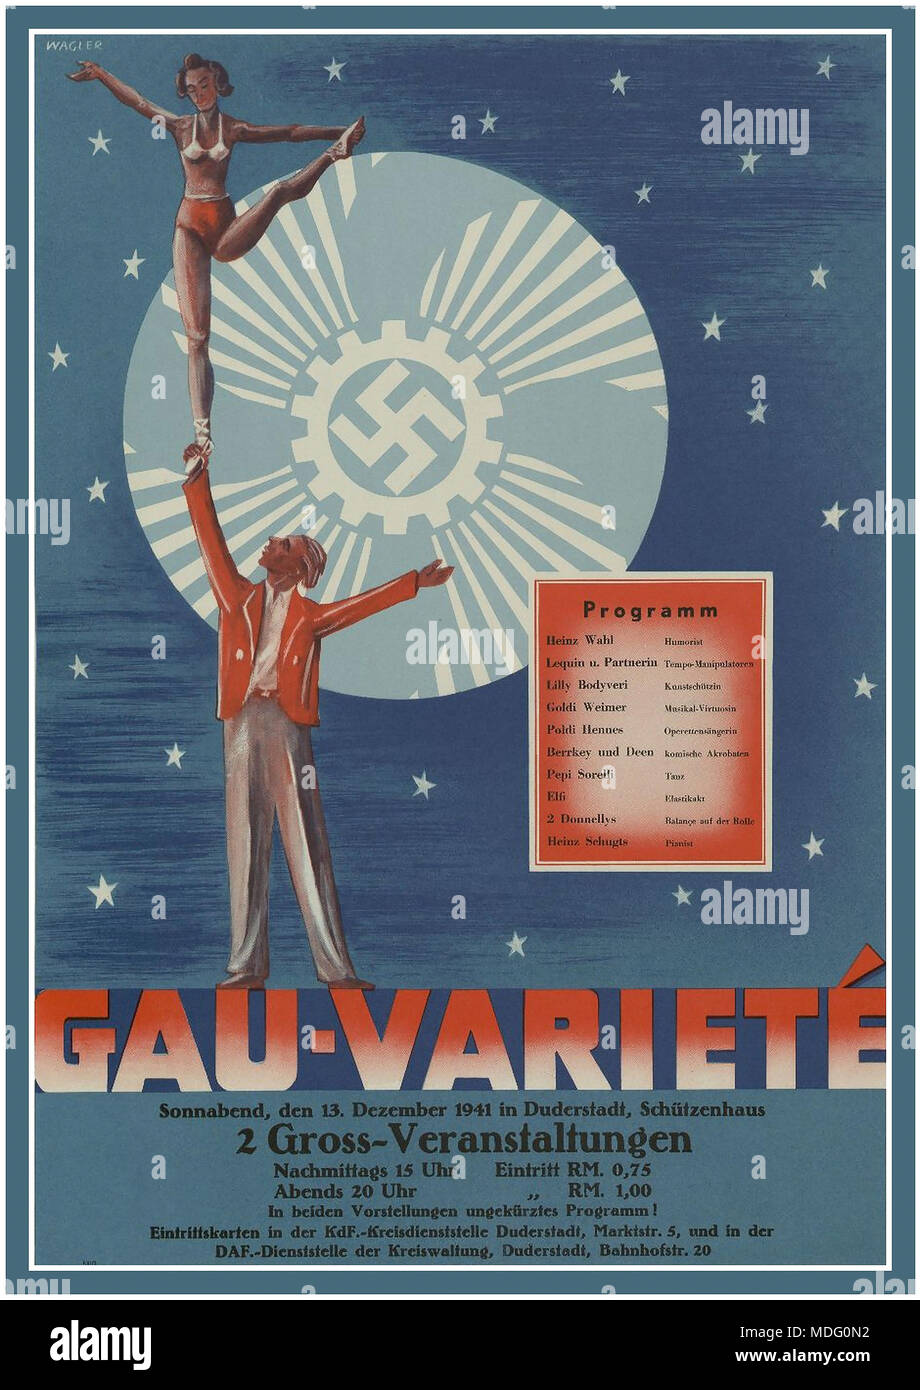 WW2 Nazi Germany Theatre poster 1941 promoting 2 major Variety events “Gau – Variete” in Duderstadt with Nazi Swastika Symbol forming part of the theatre performance propaganda Stock Photo